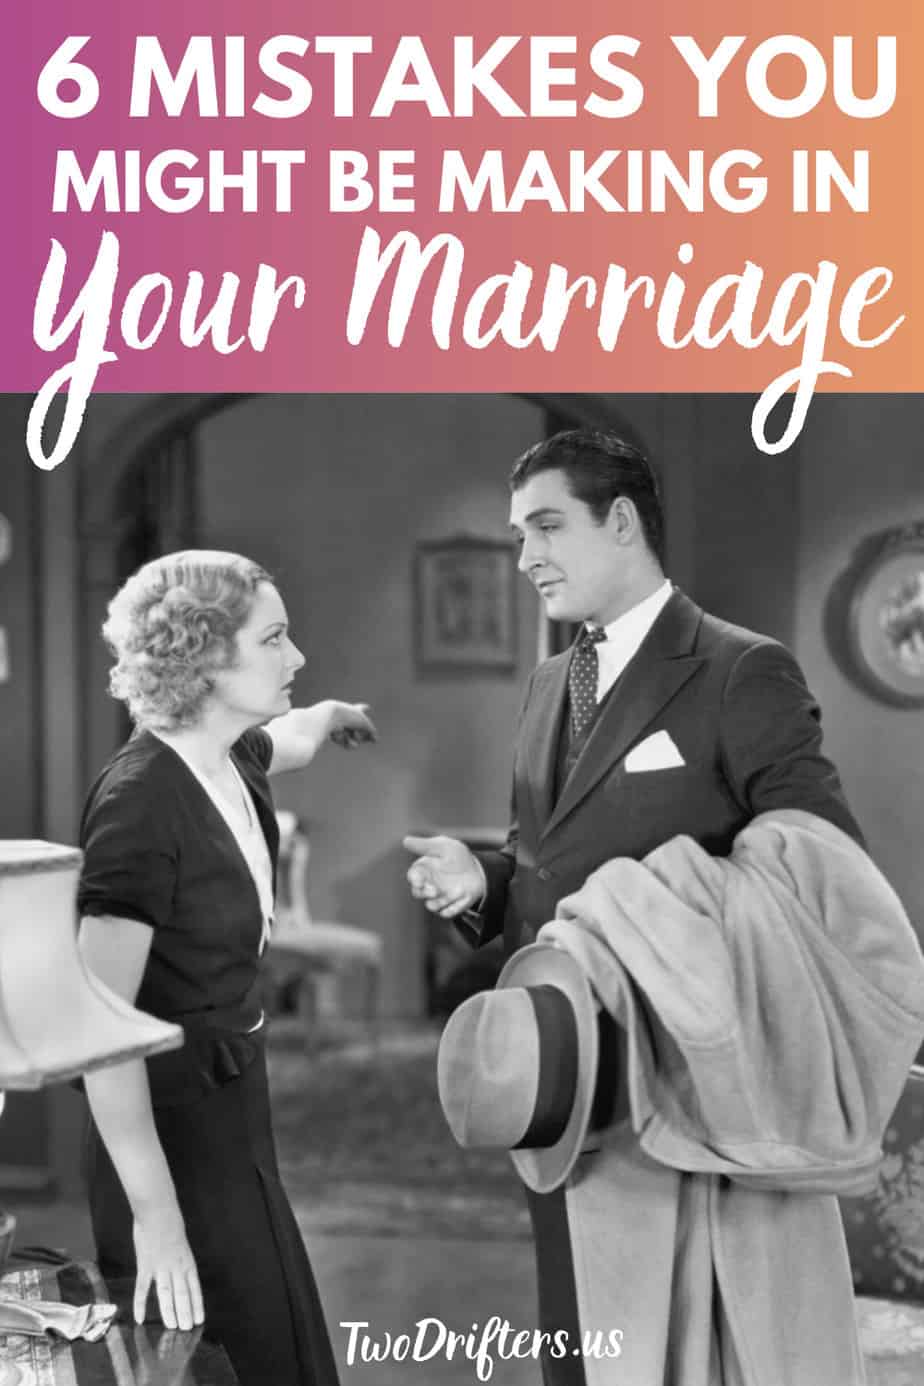 Pinterest social share image that says "6 Mistakes You Might be Making in Your Marriage."